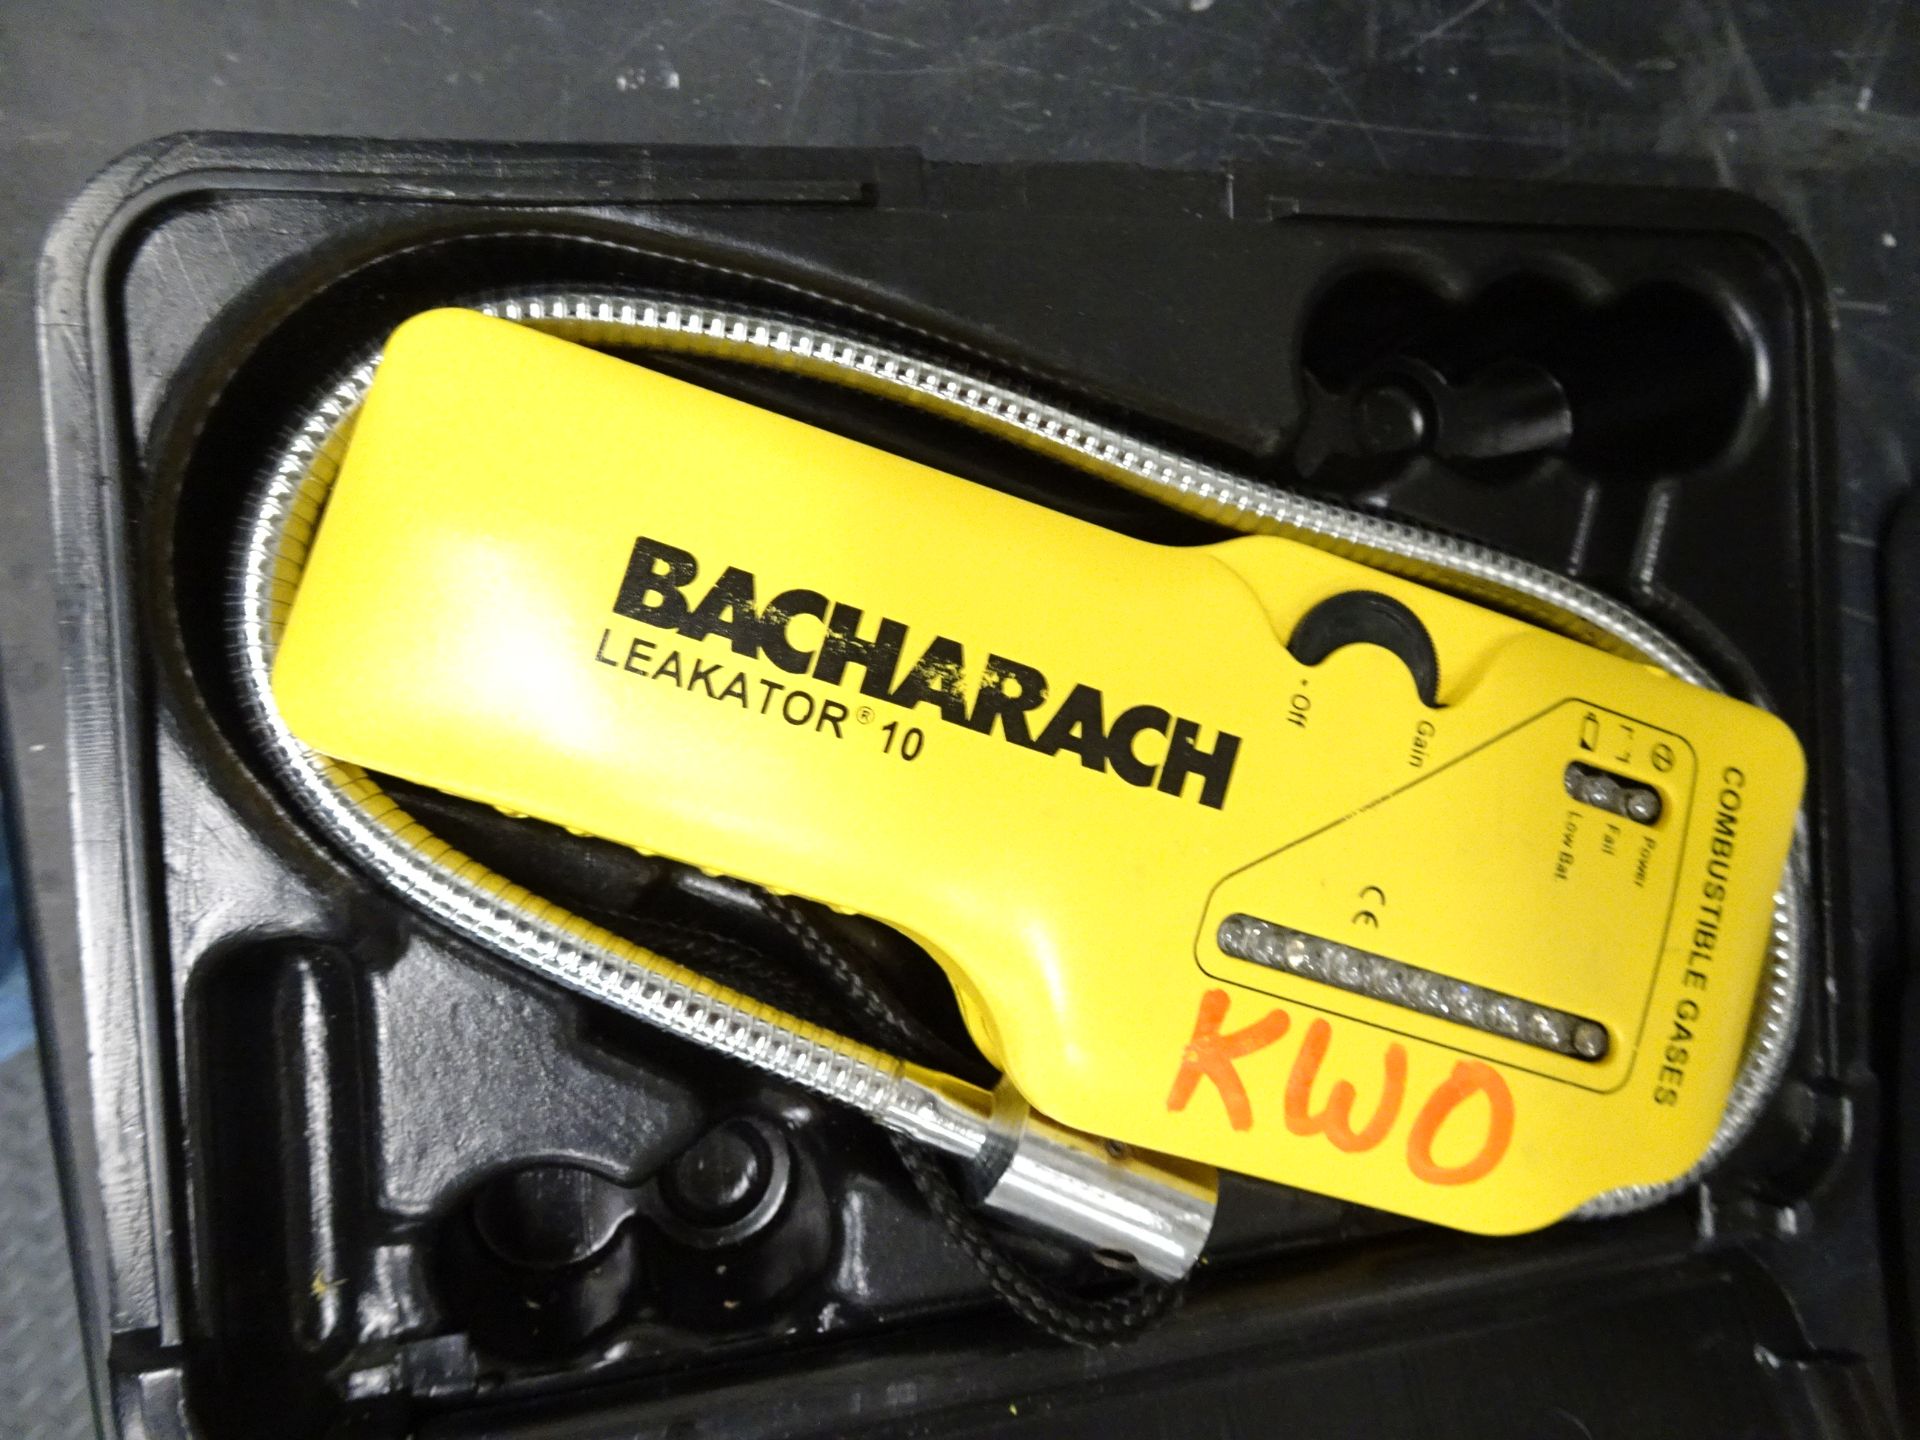 (1) Bachrach Leakator No. 10 Handheld Combustible Gas Detector Part No. 19-7051 With Associated